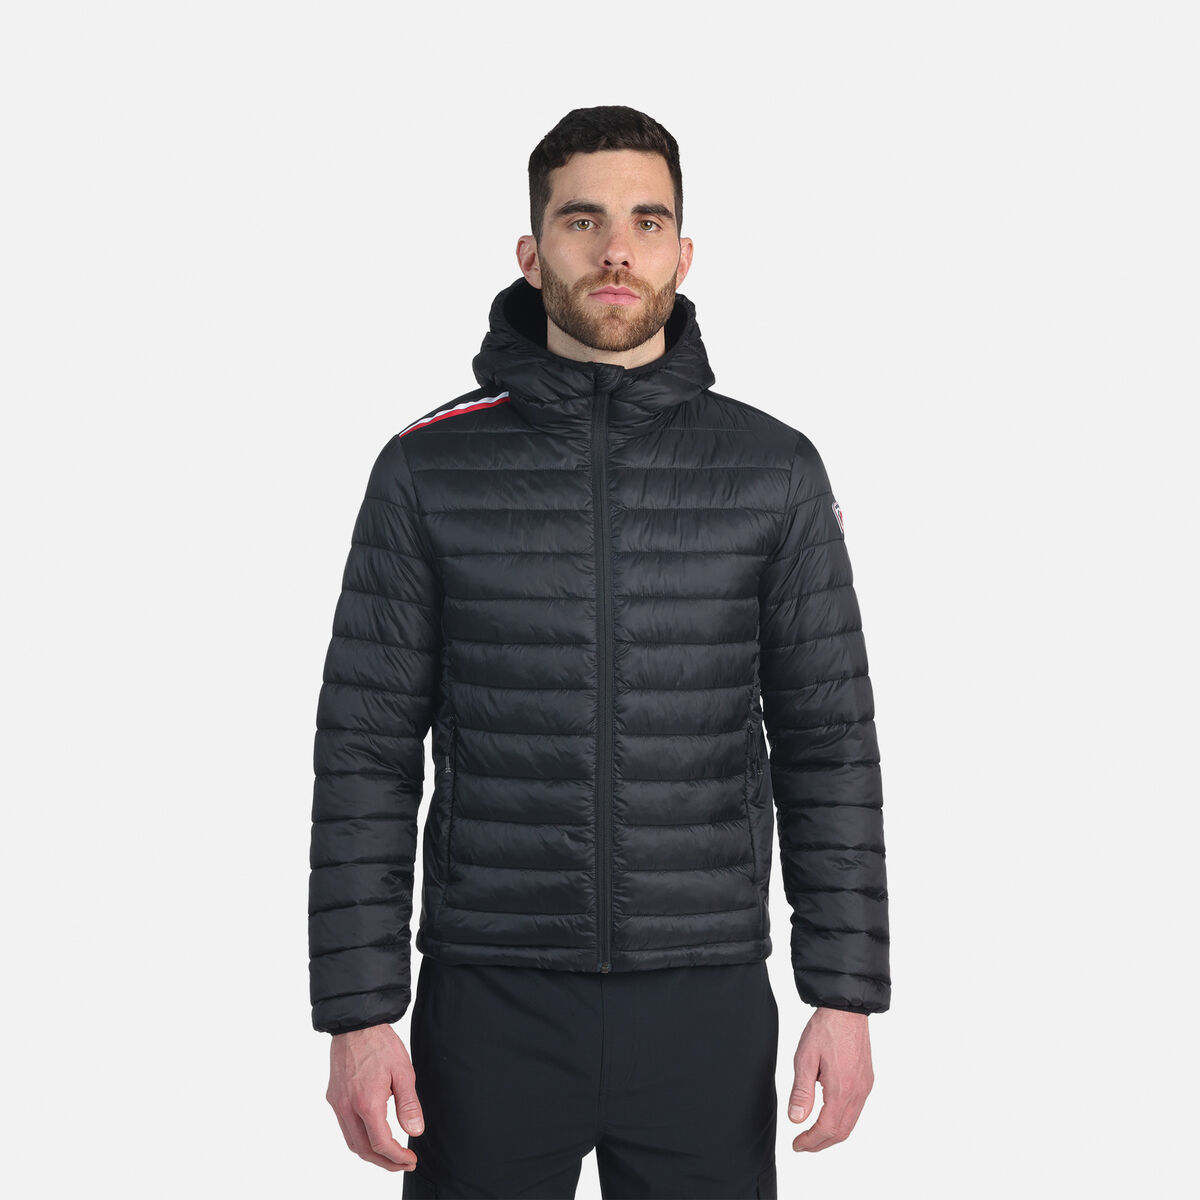 Men's hooded insulated jacket 100GR